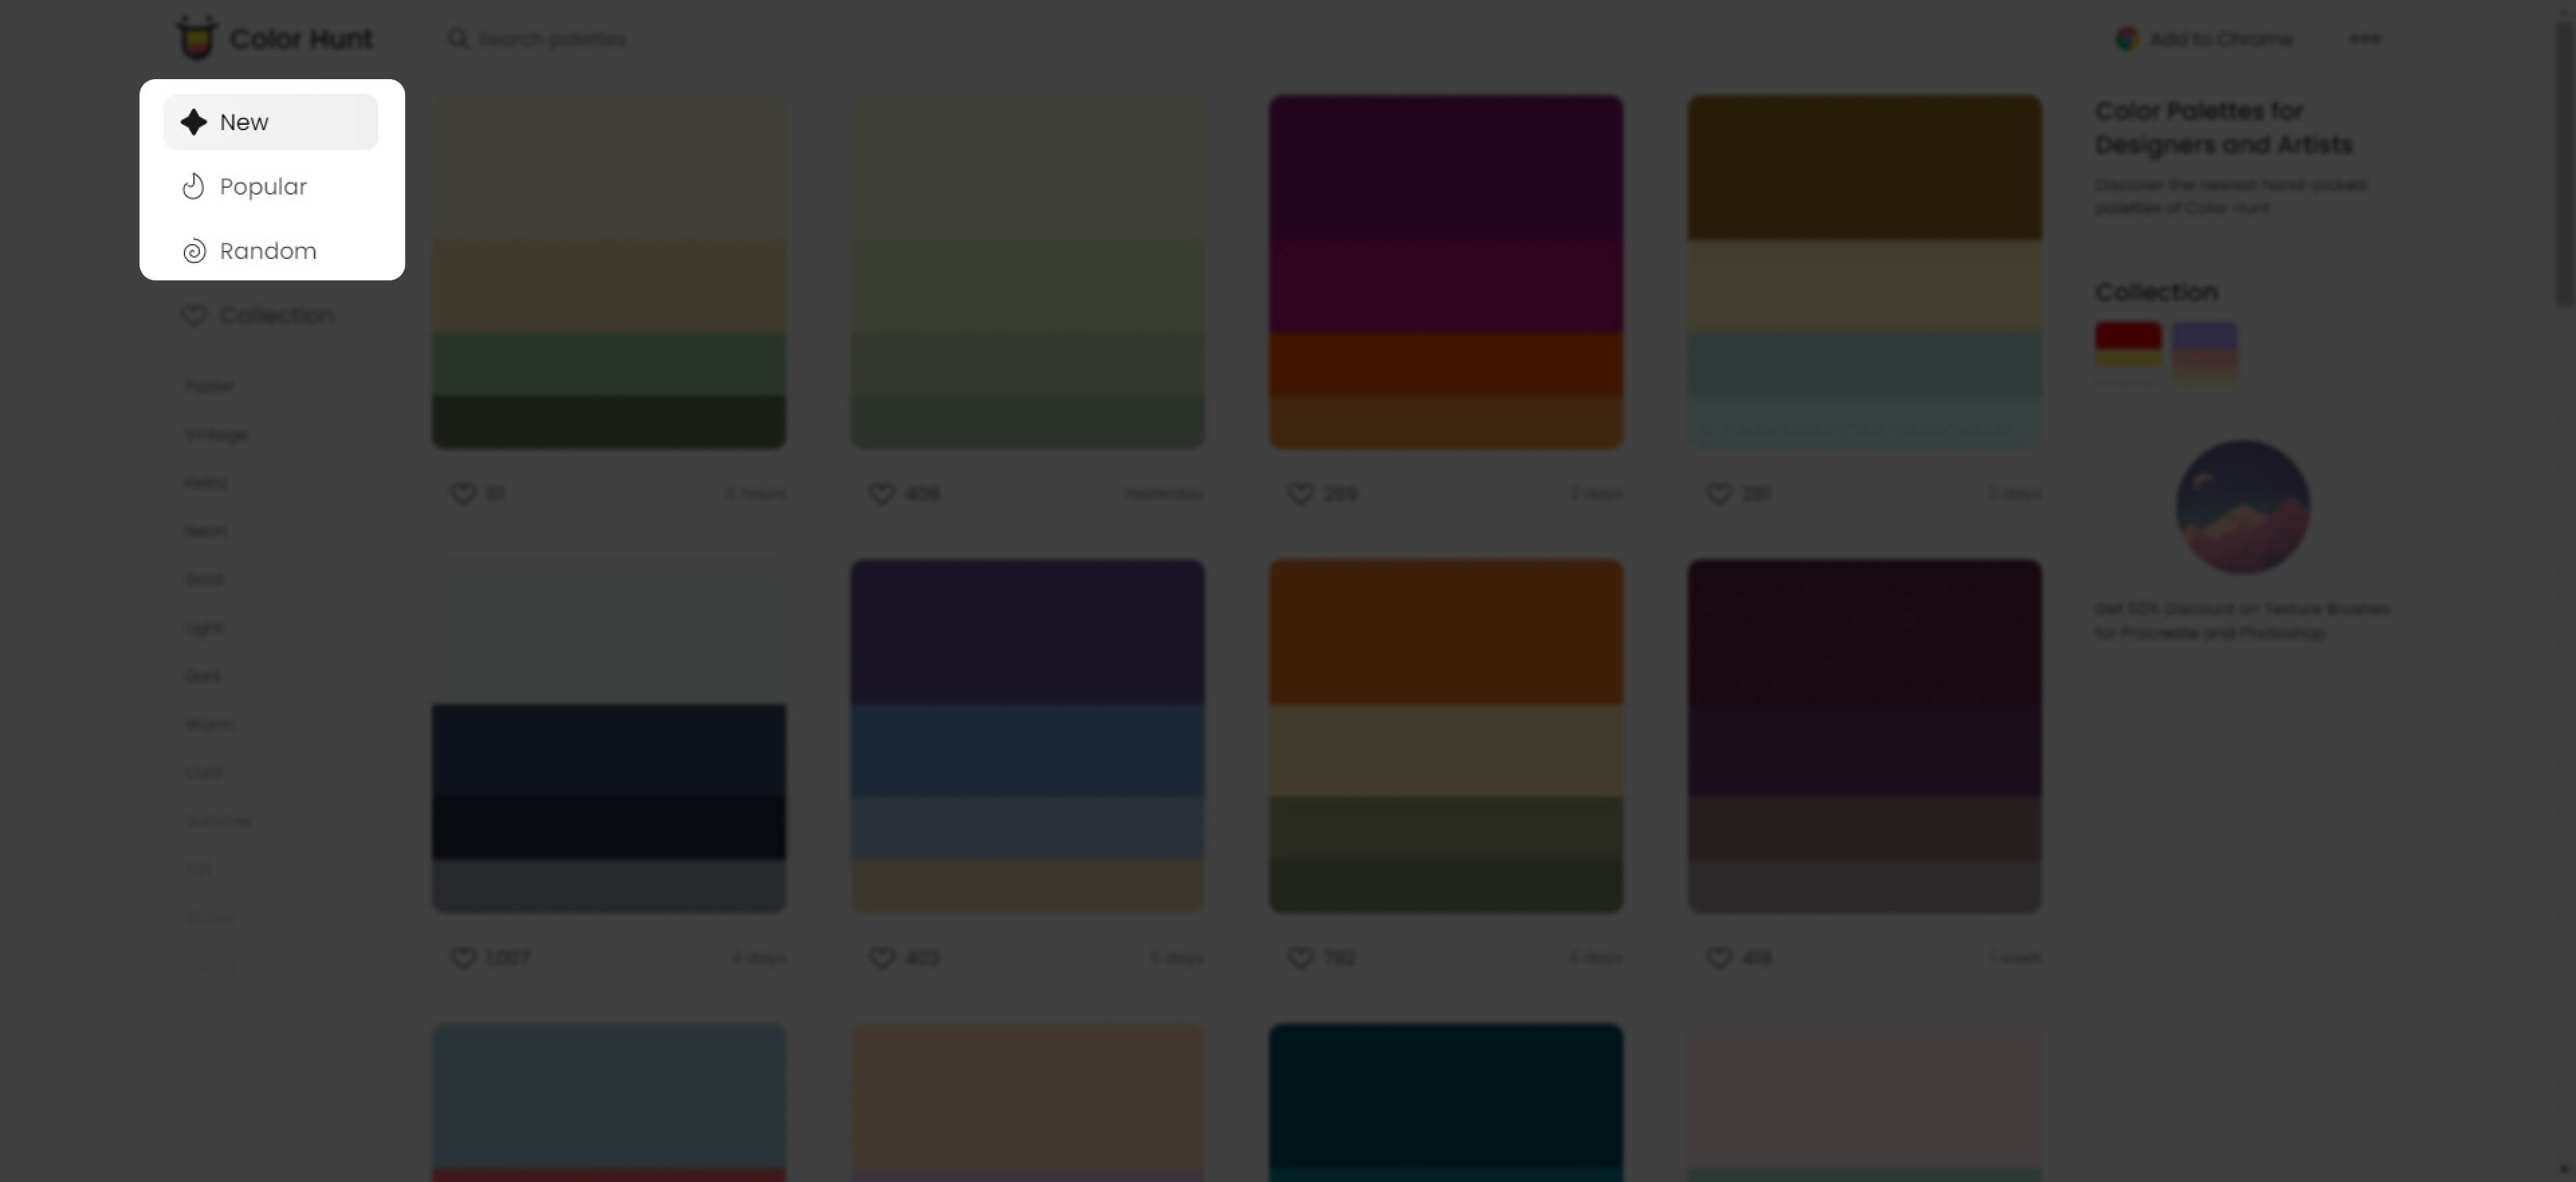 colorhunt_02-1_category